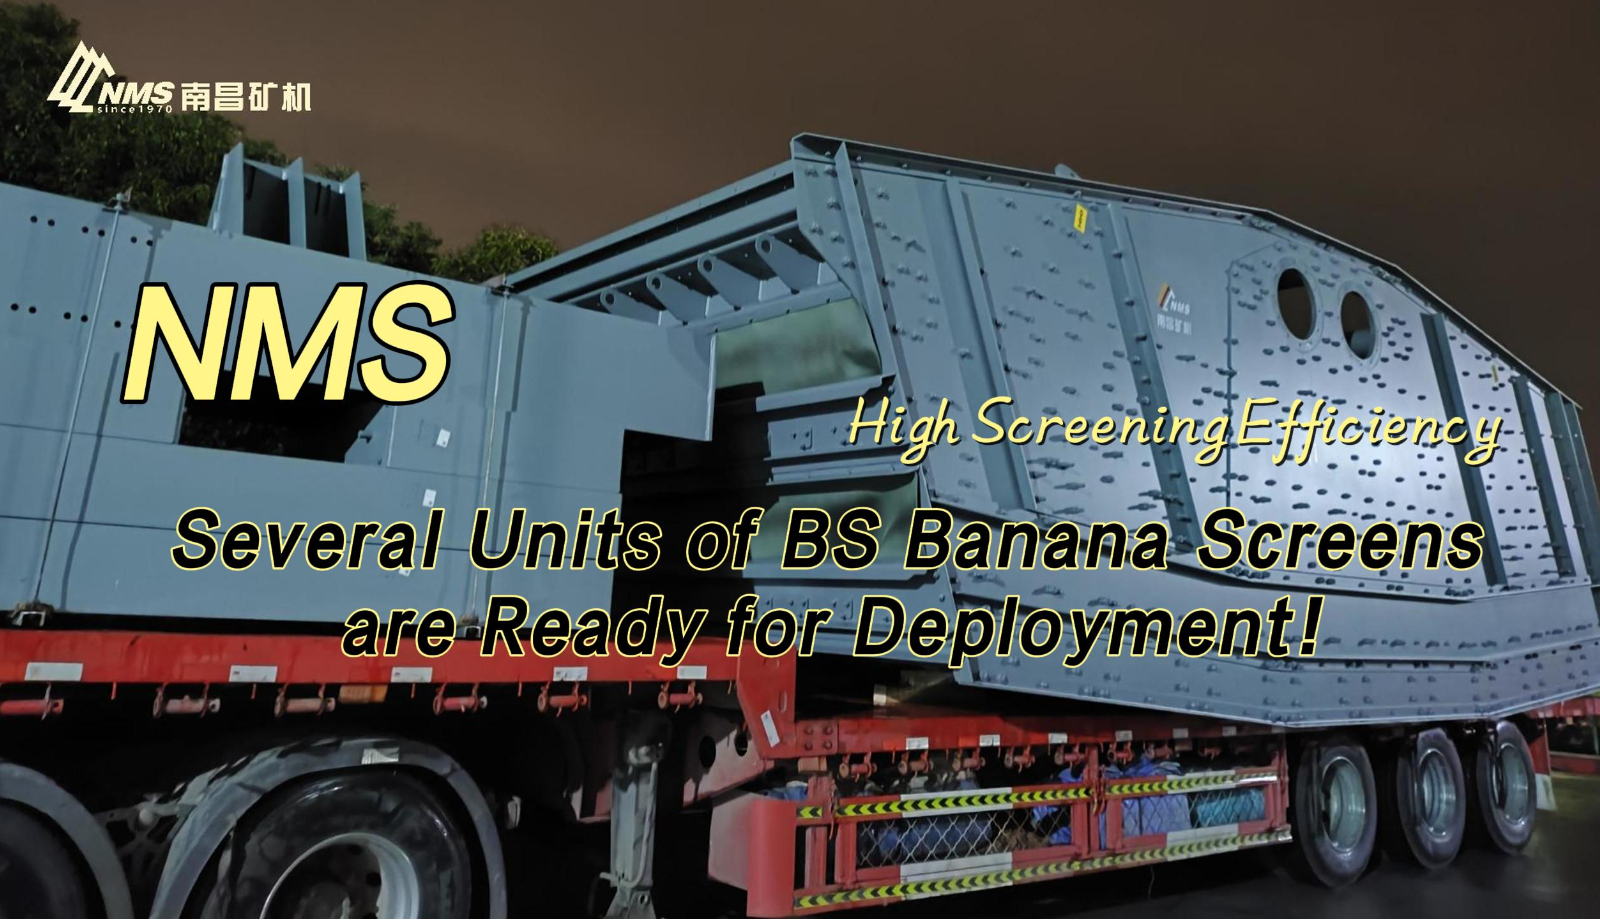 Several Units of BS Banana Screens from NMS are Ready for Deployment!